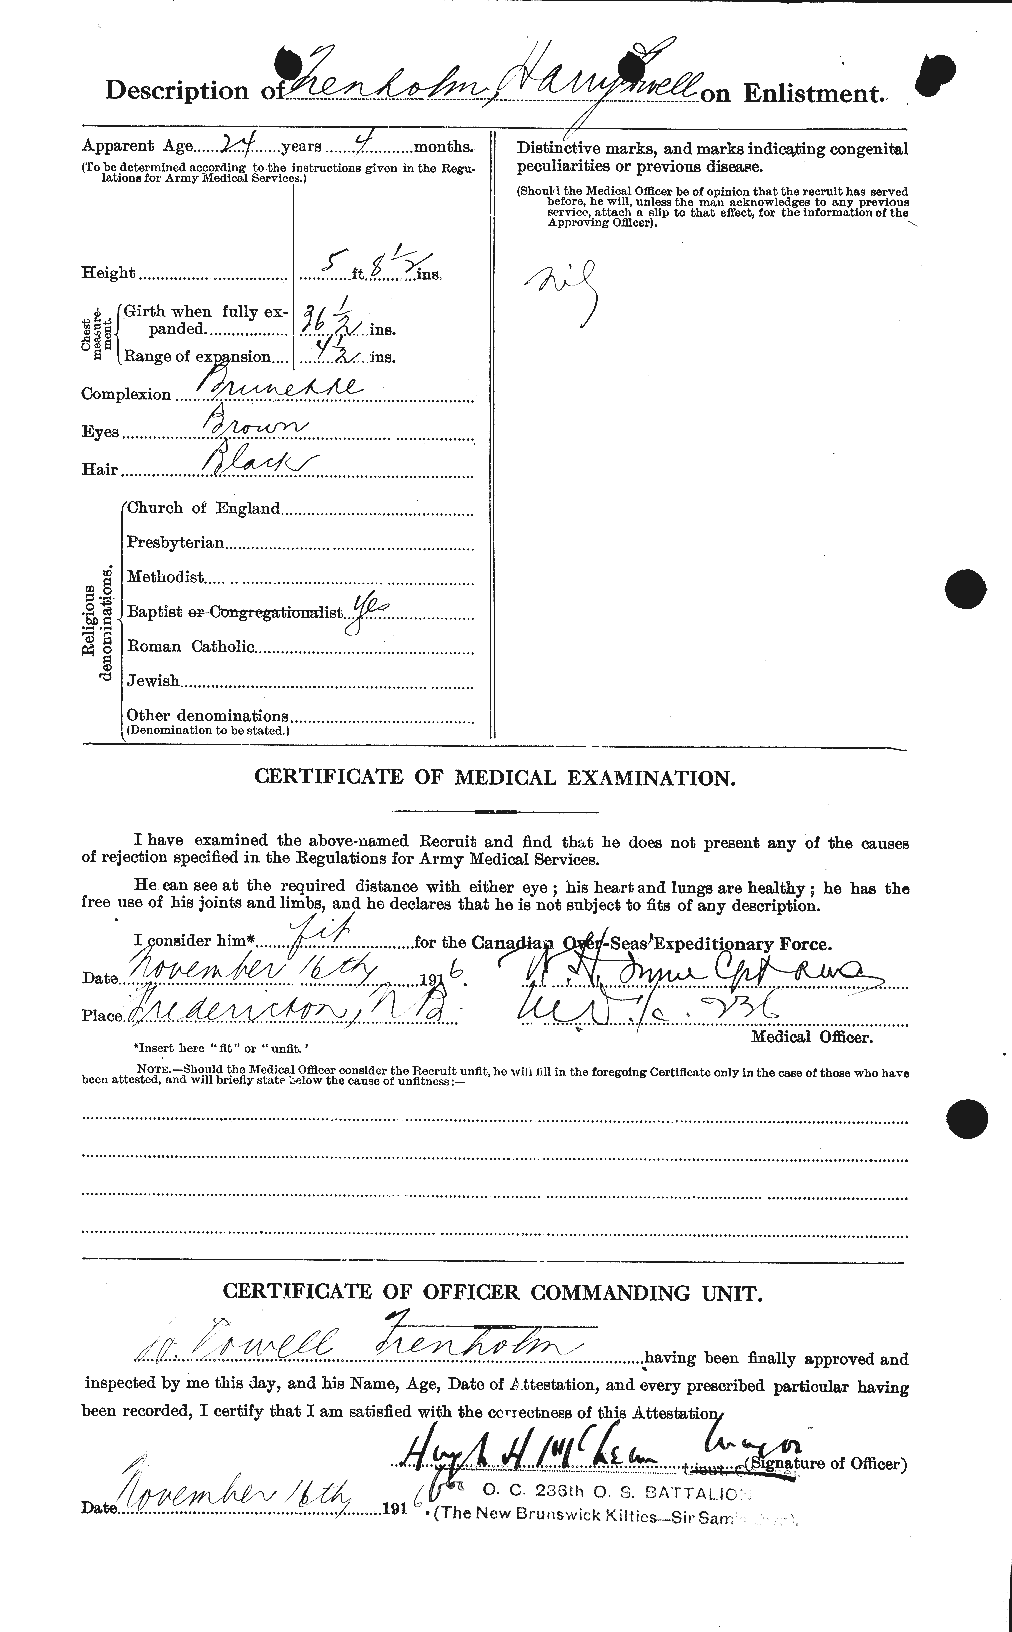 Personnel Records of the First World War - CEF 638459b